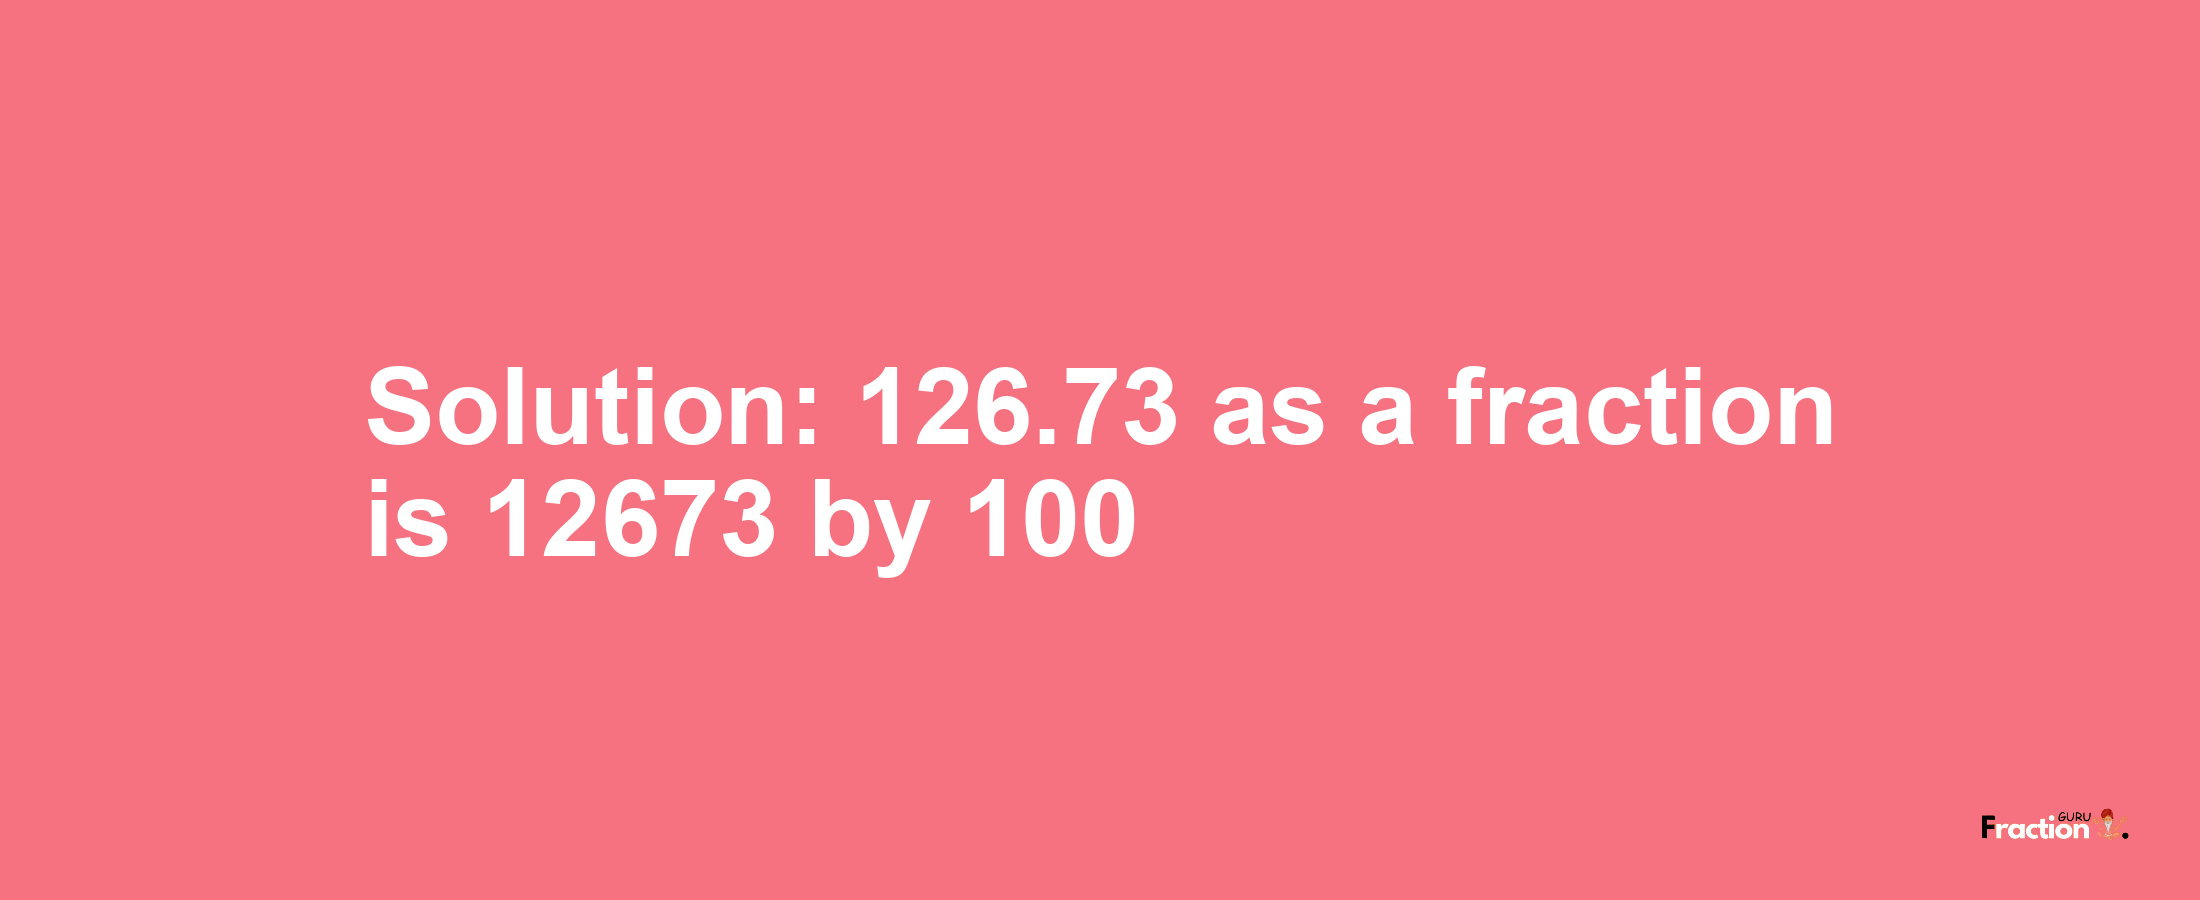 Solution:126.73 as a fraction is 12673/100